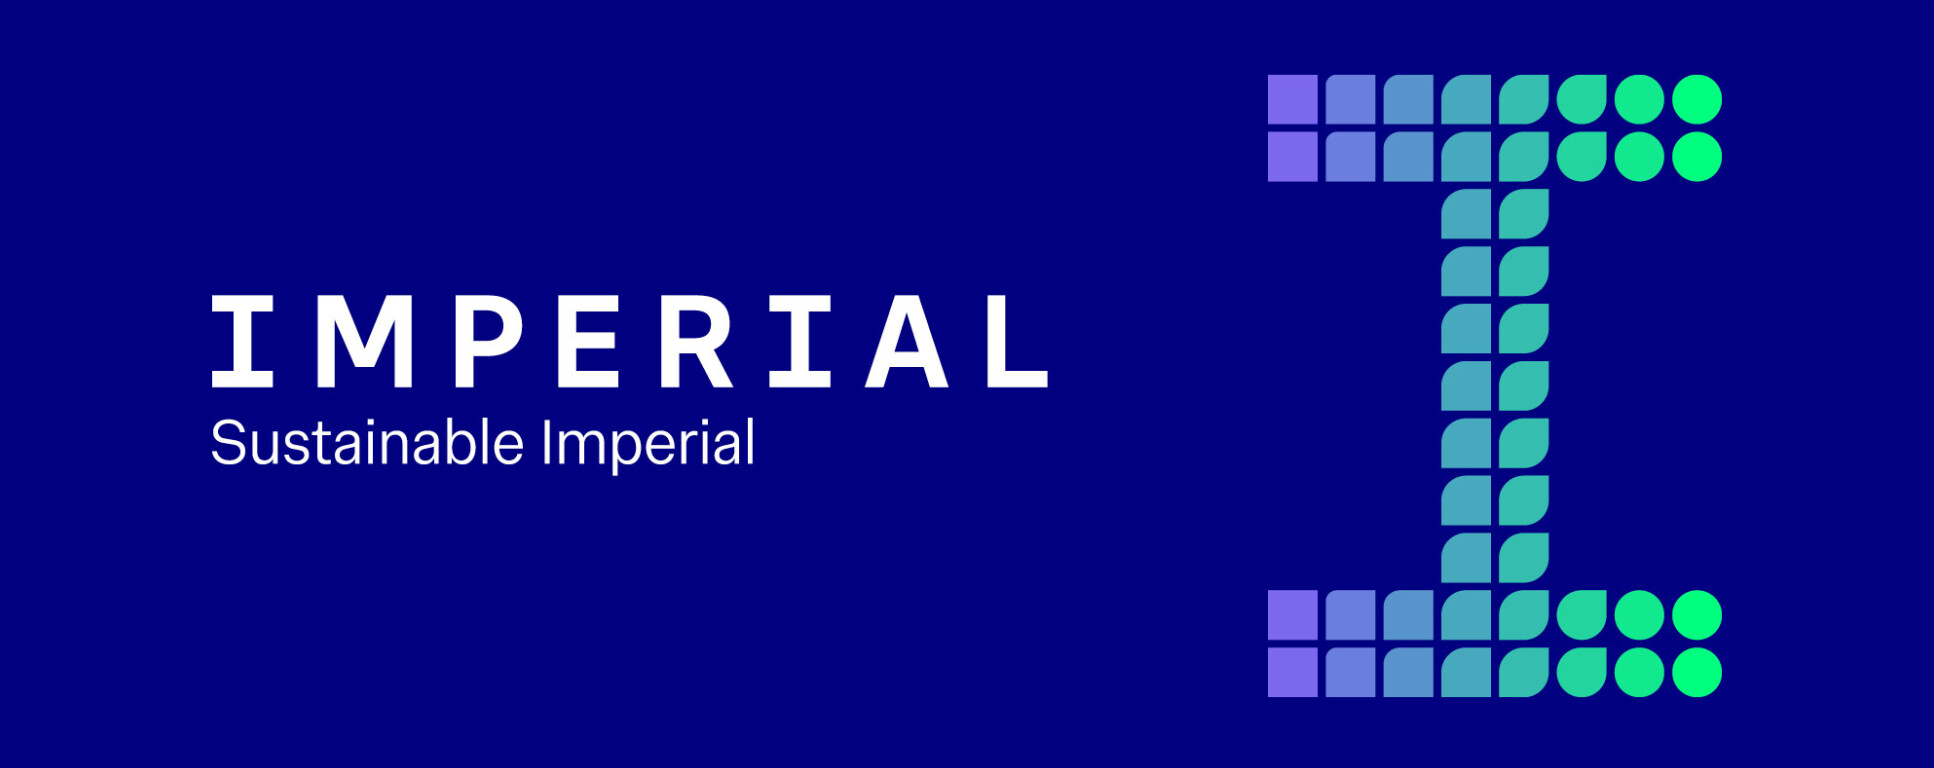 The new Sustainable Imperial brand, with a capital 'I' made out of circles